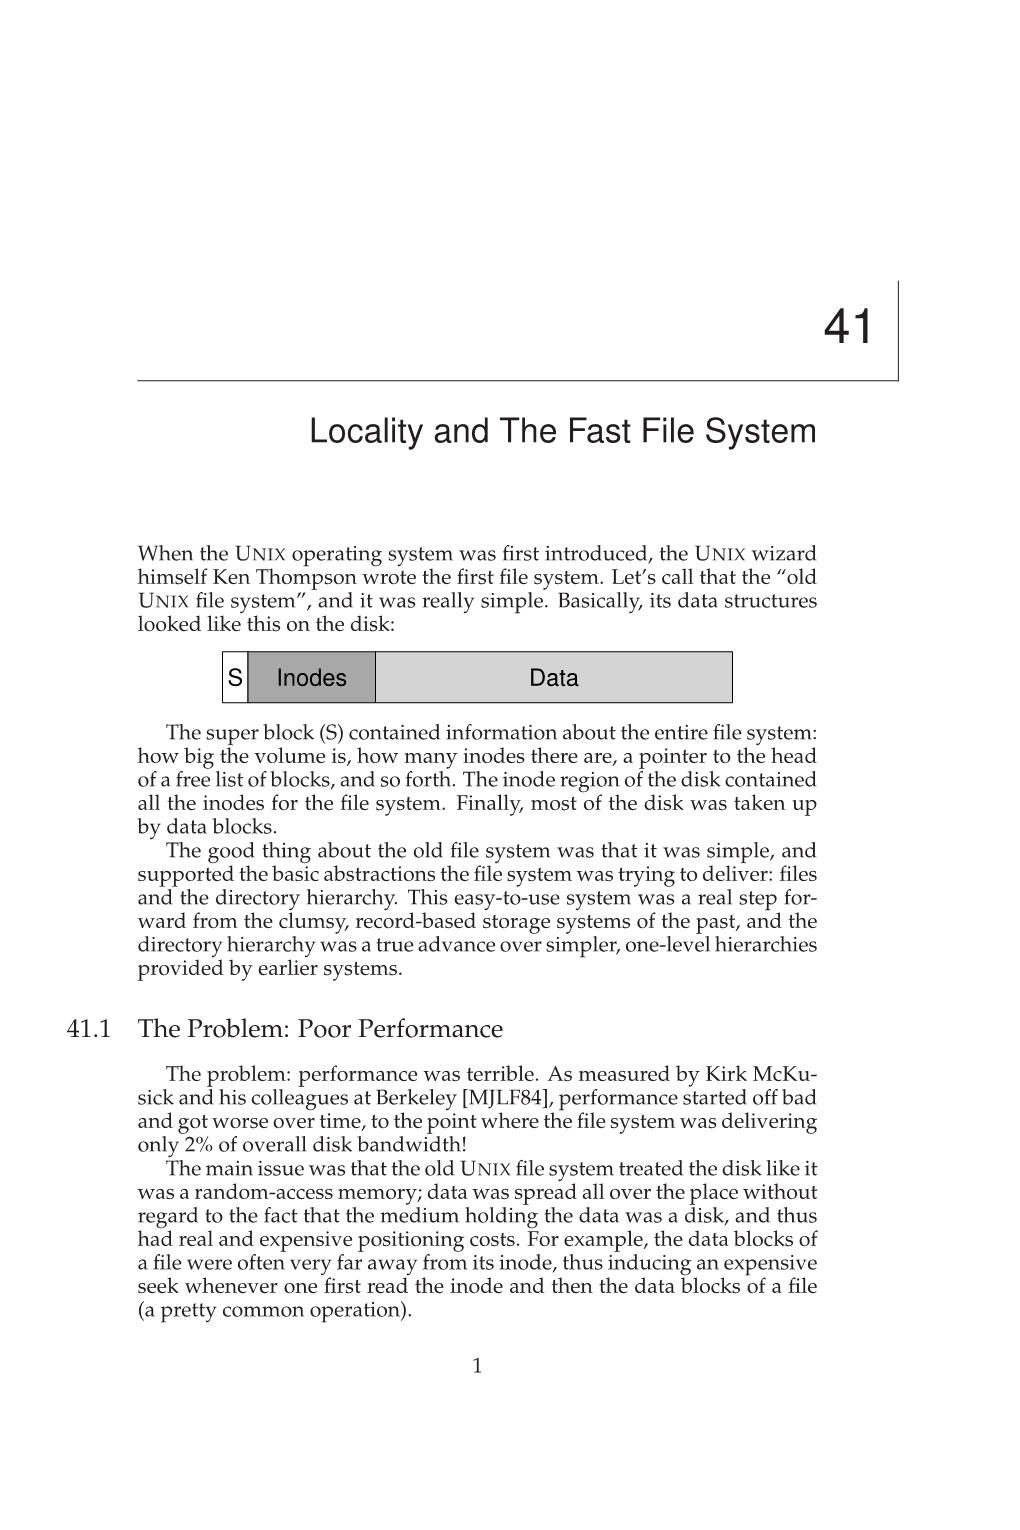 Locality and the Fast File System